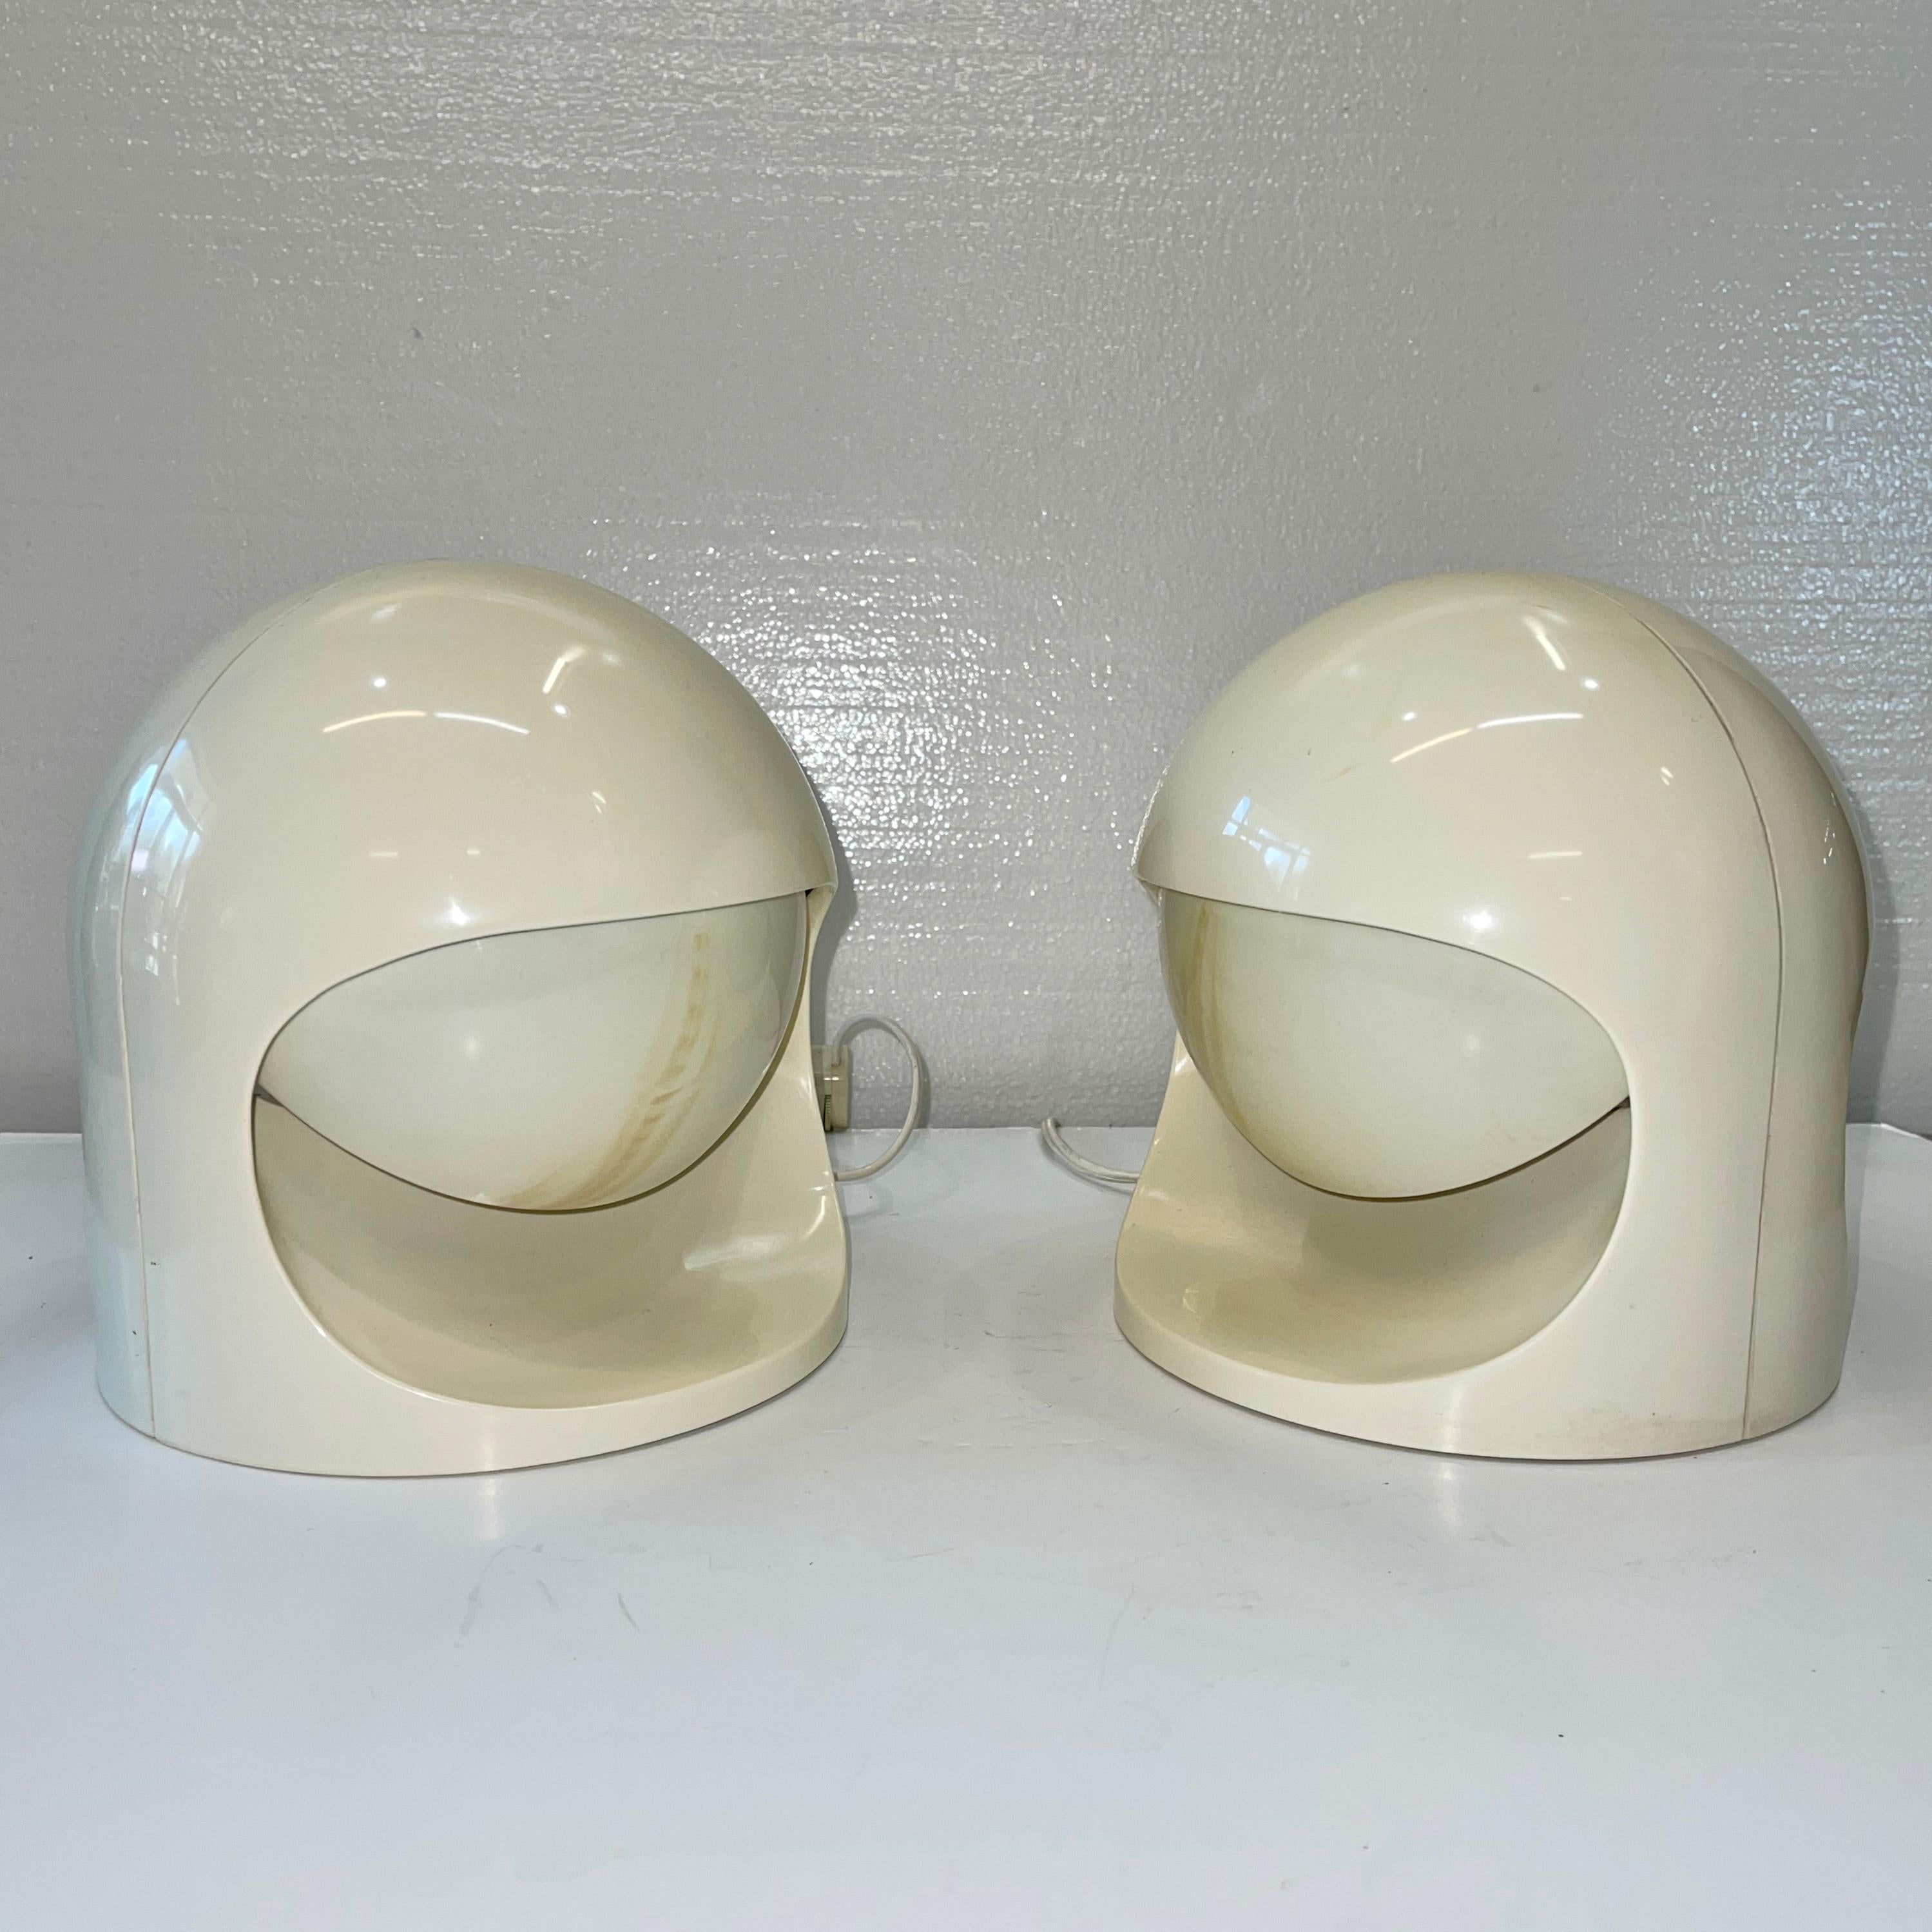 1970s Italian designed Space Age plastic eclipse lamps in the form of an astronaut helmet with adjustable opaque 'visor' diffusors to control the light.
The Interplay I (aka Selene) and II Series were actually made by ABM, Milano (which became